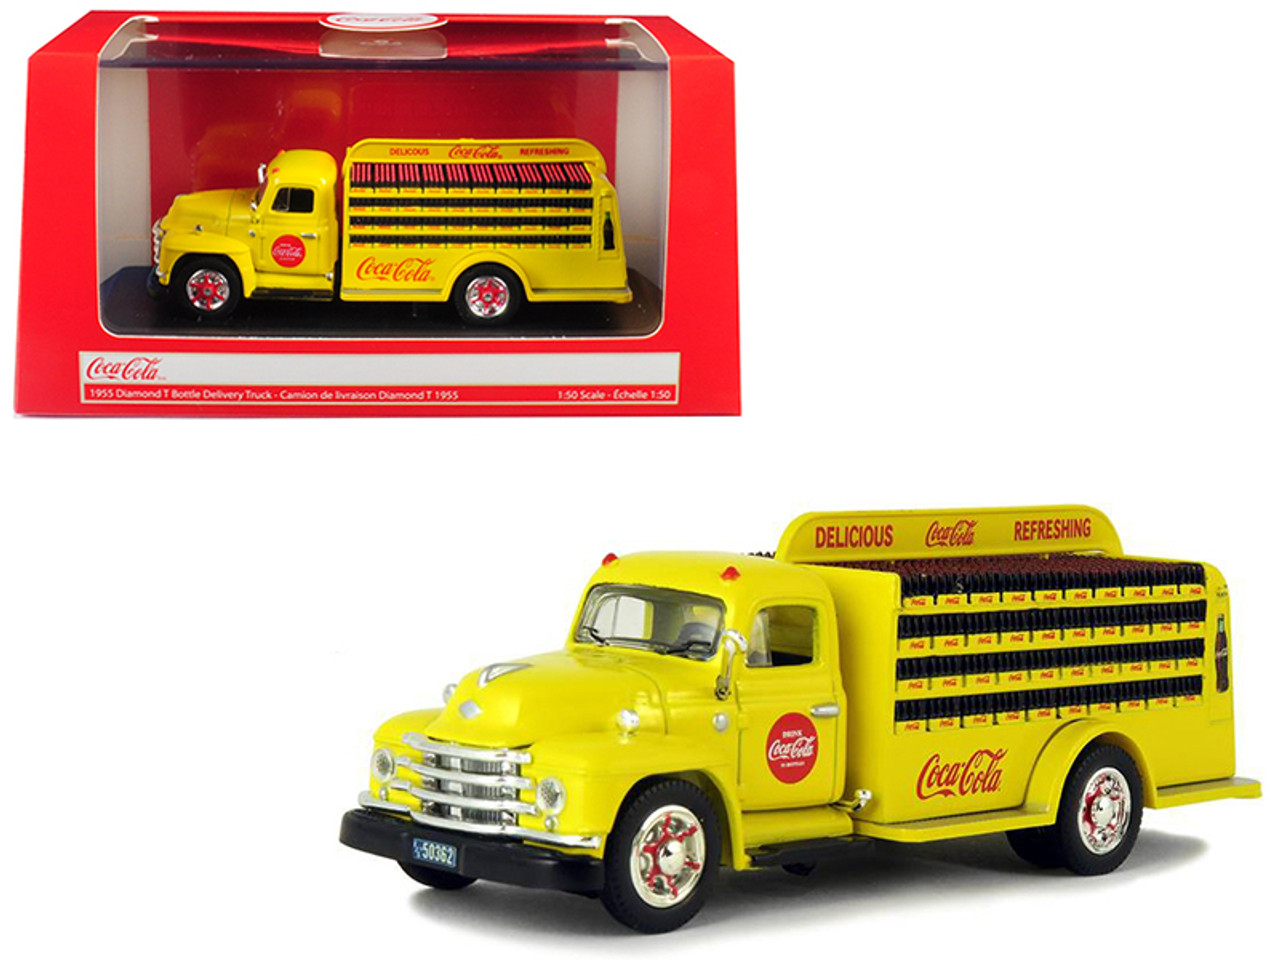 1955 Diamond T Bottle Delivery Truck "Coca-Cola" Yellow 1/50 Diecast Model Car by Motorcity Classics